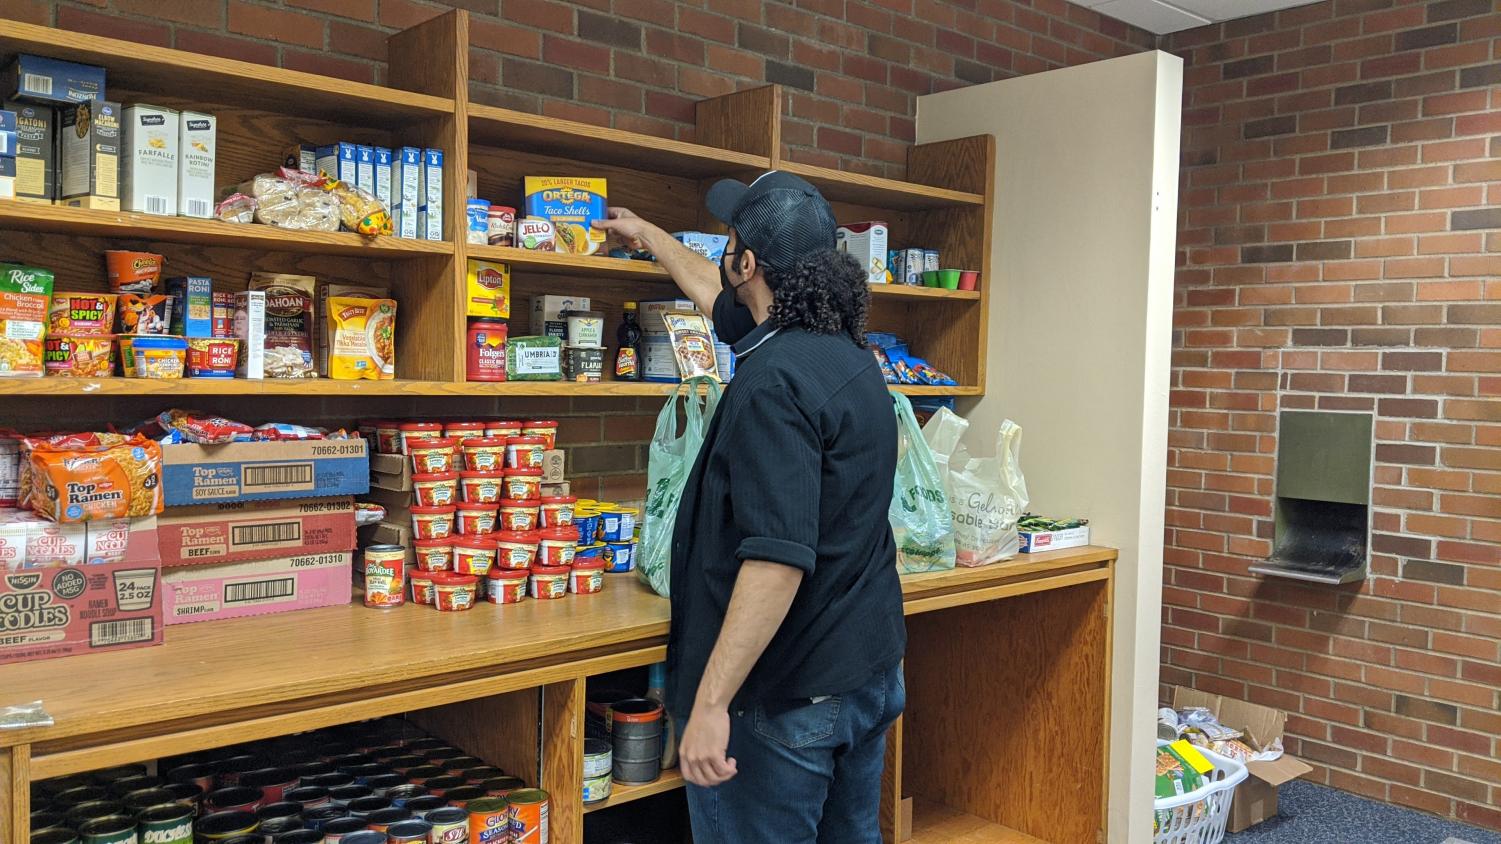 Student reaching out to grab food from the pantry shelf.